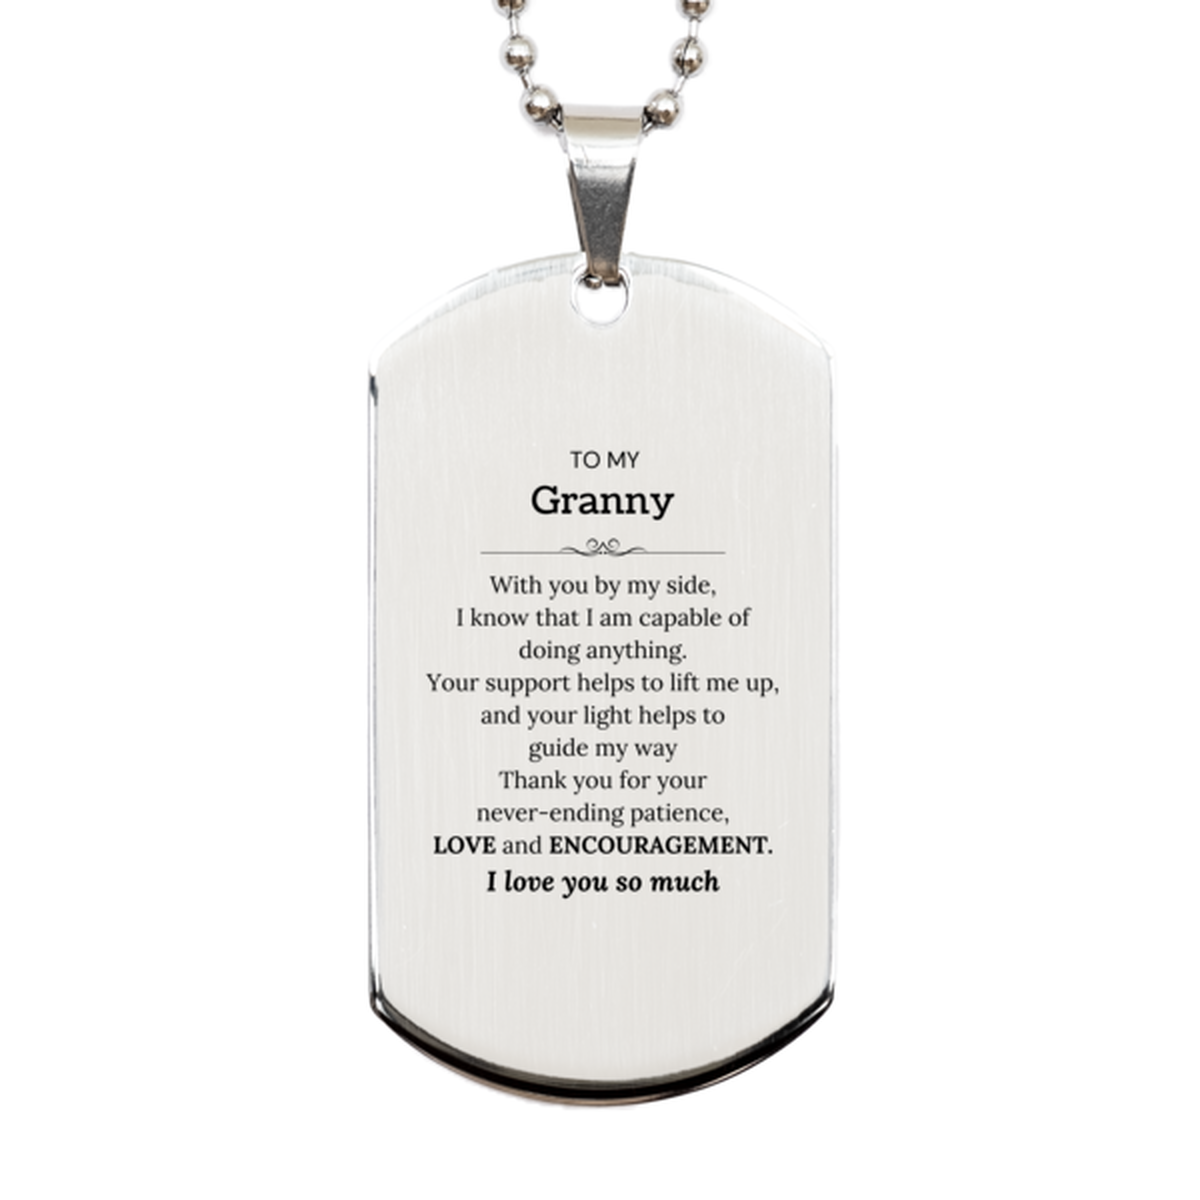 Appreciation Granny Silver Dog Tag Gifts, To My Granny Birthday Christmas Wedding Keepsake Gifts for Granny With you by my side, I know that I am capable of doing anything. I love you so much